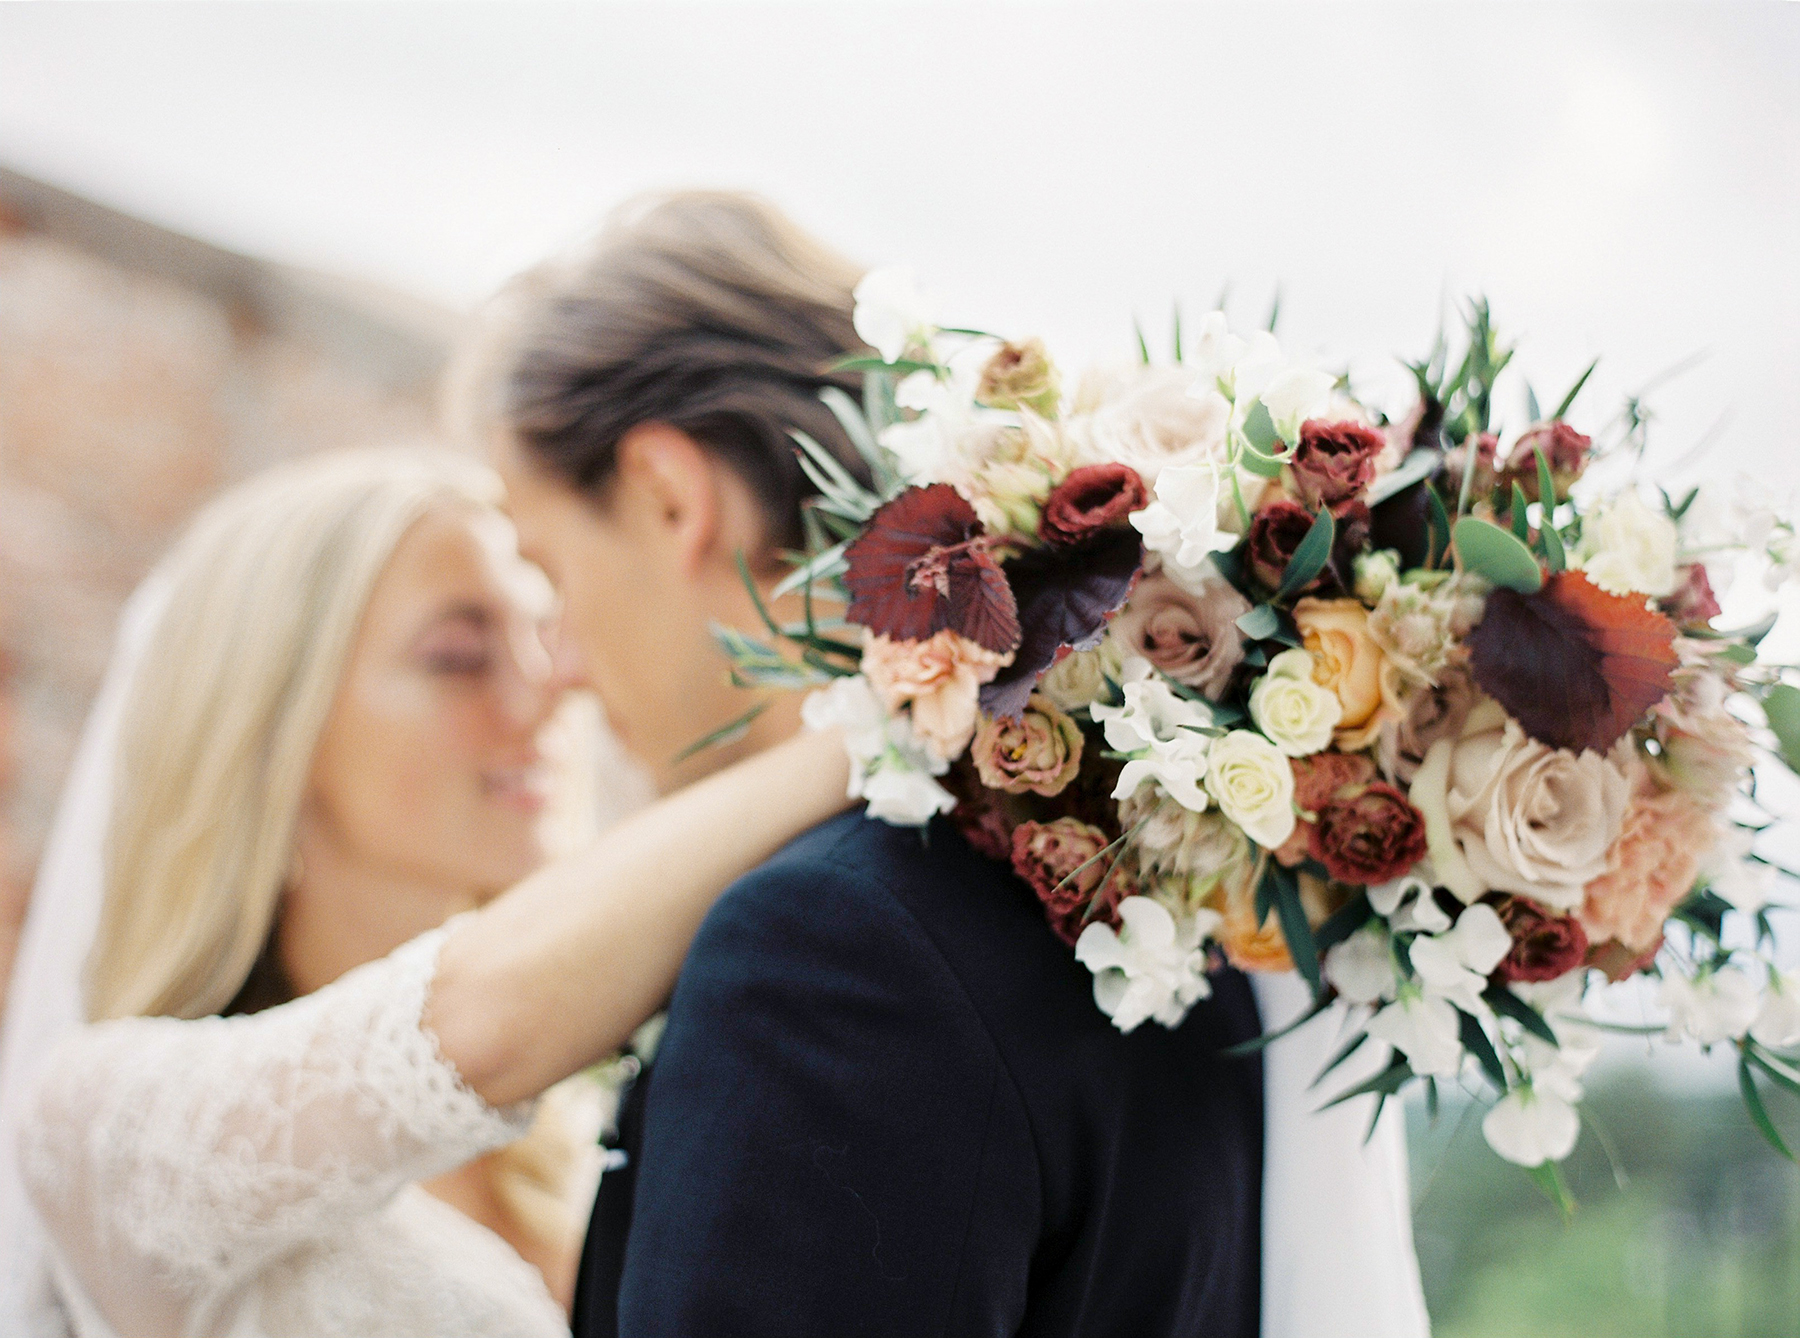 Bright and Warm Colored Wedding Inspiration in Sweden 2 Brides Photography47